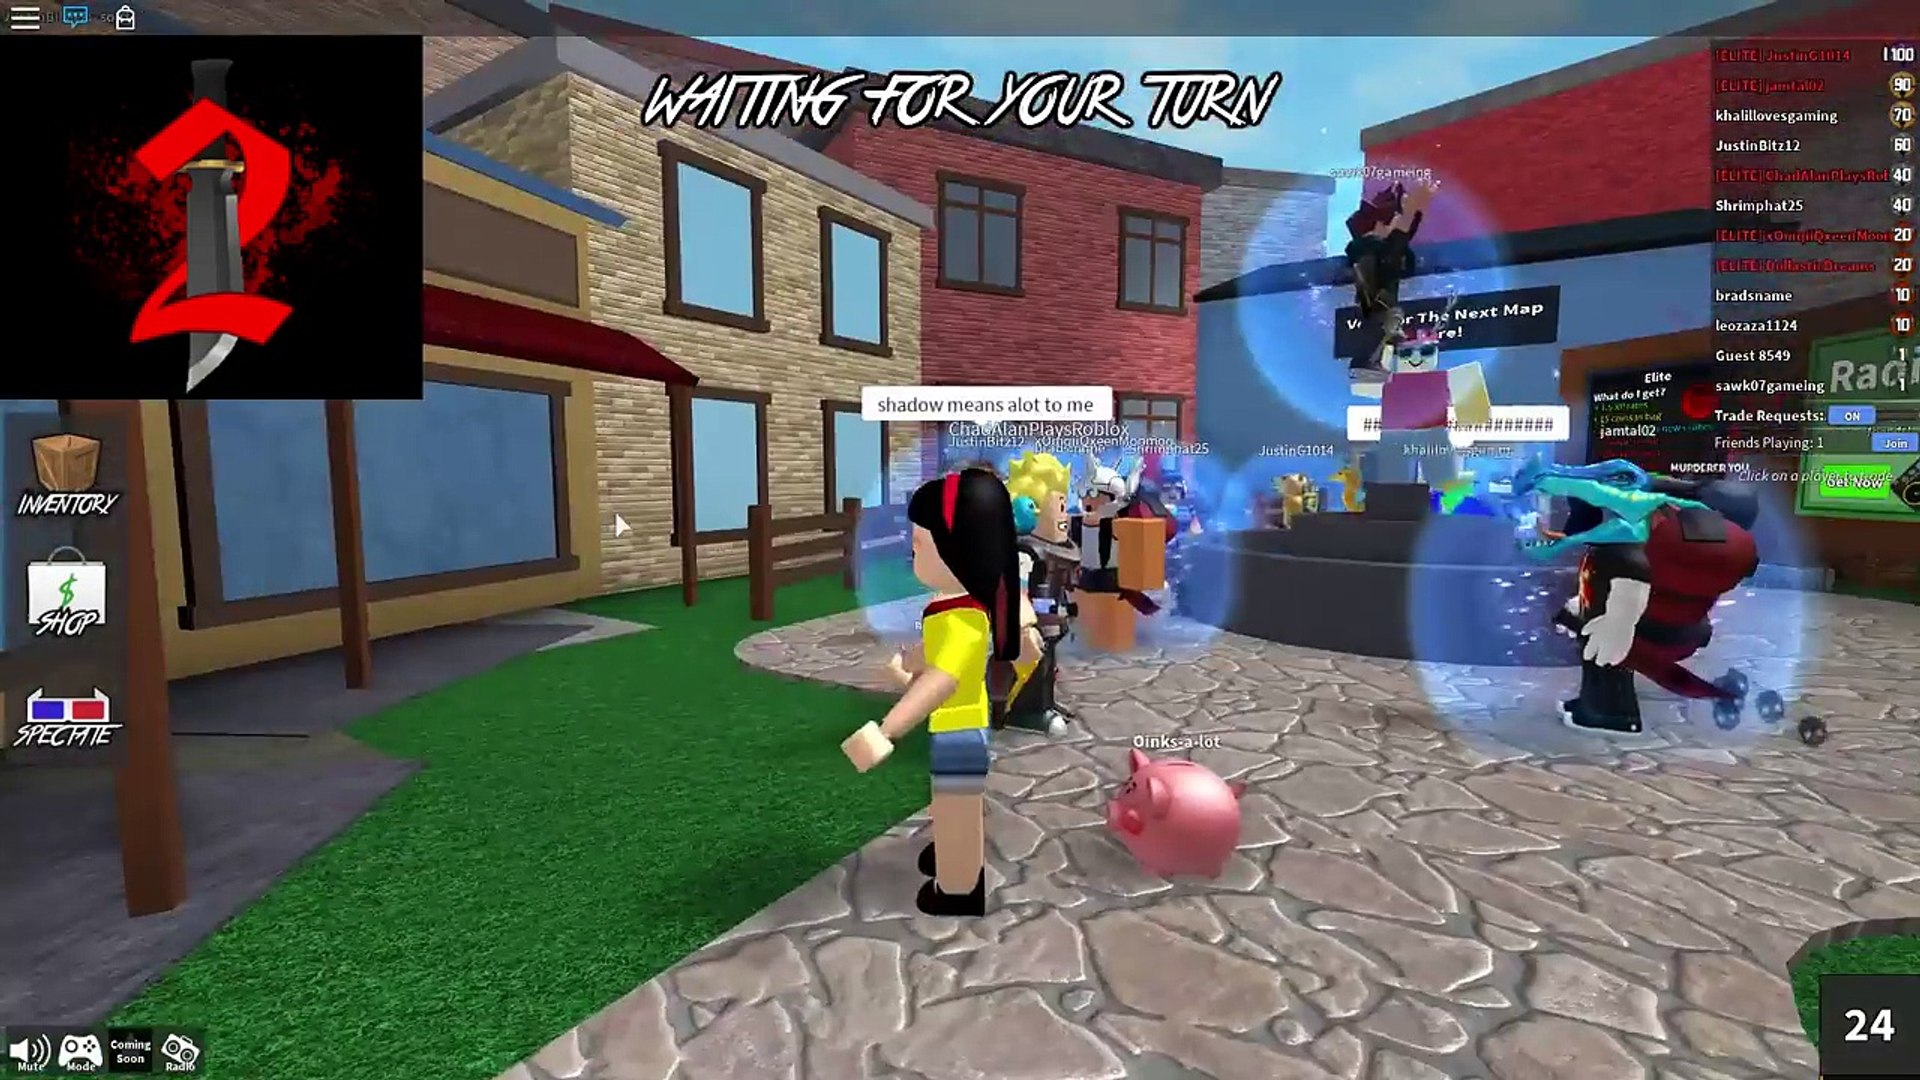 Dodge The Murderer Roblox Murder Mystery 2 Dollastic Plays With Gamer Chad Video Dailymotion - show down time roblox murder mystery 2 with gamer chad dollastic plays dailymotion video